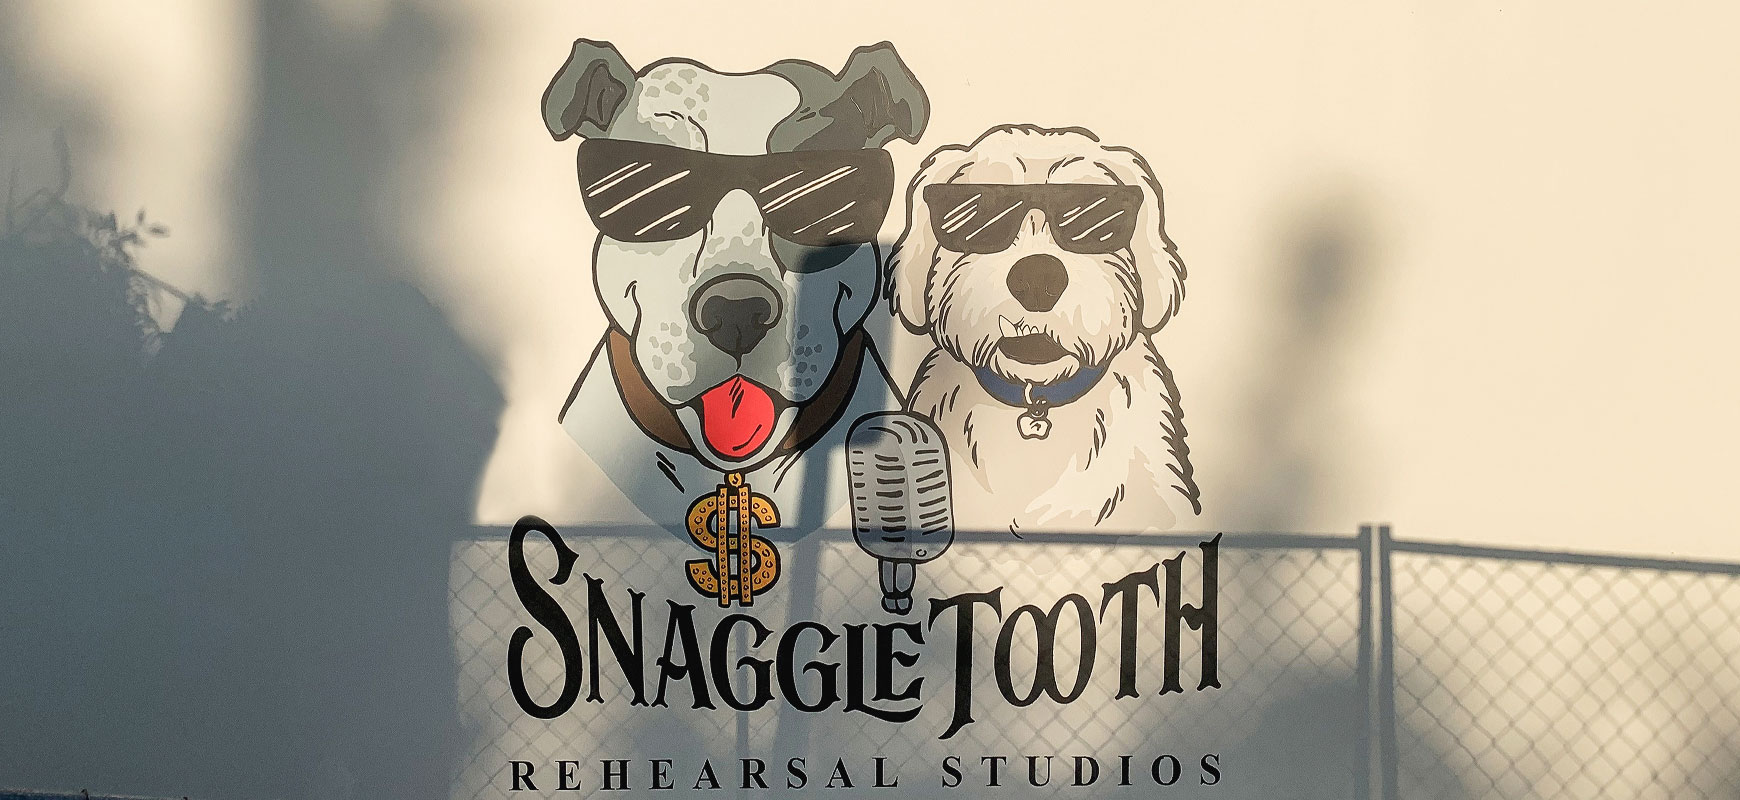 Snaggle Tooth outdoor wall decal displaying the company name and logo made of opaque vinyl